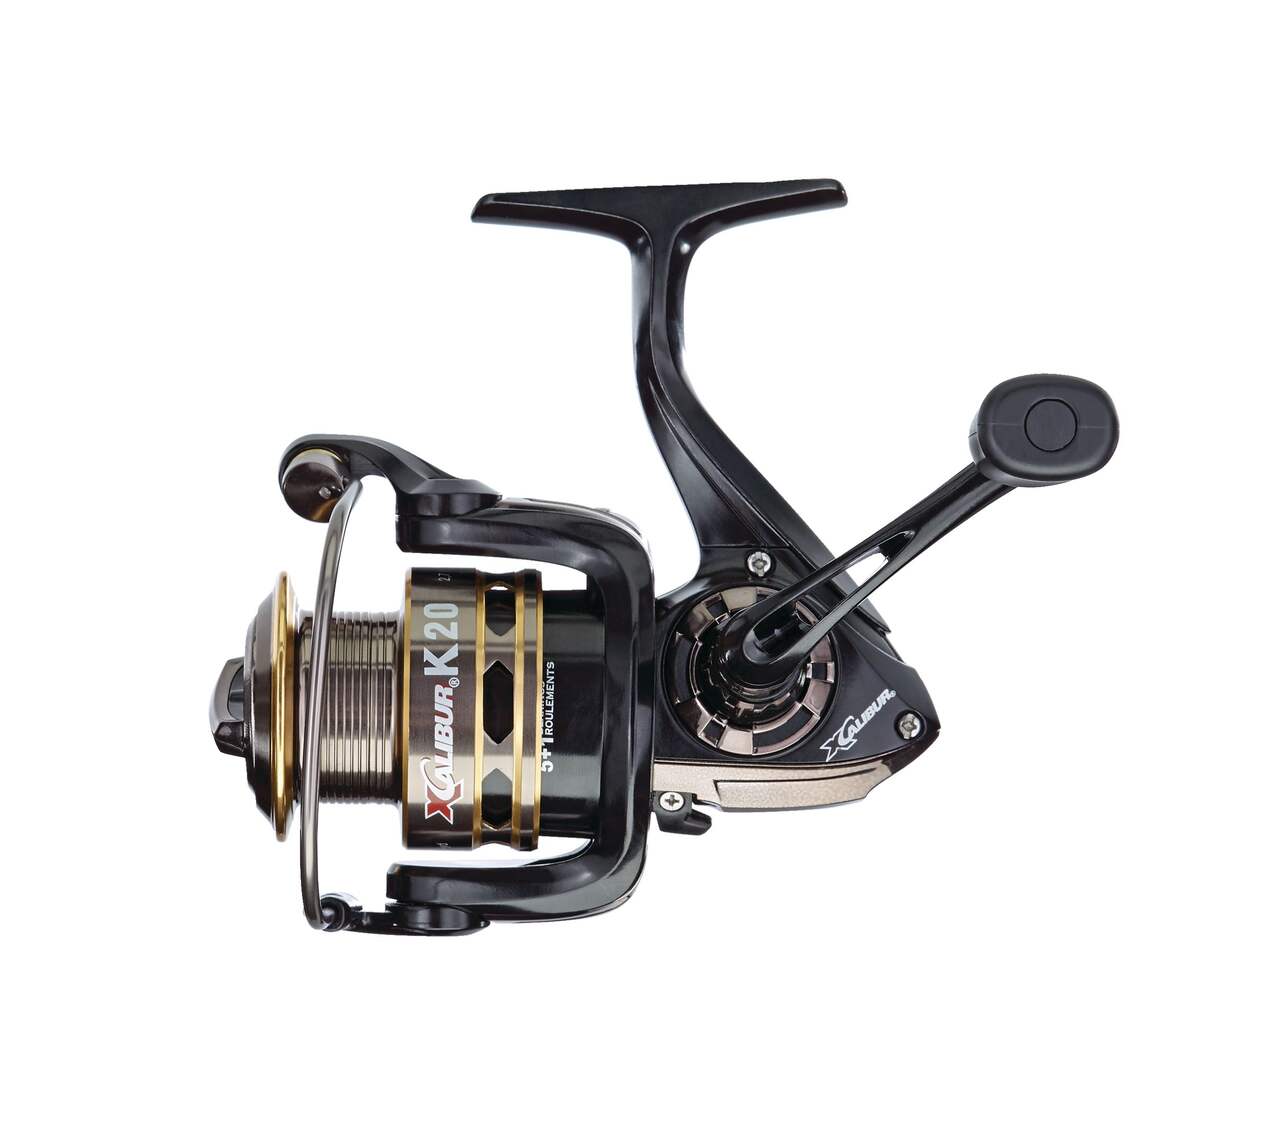 2023 New All Metal Fishing Reel Spinning Coil Saltwater Carp 11+